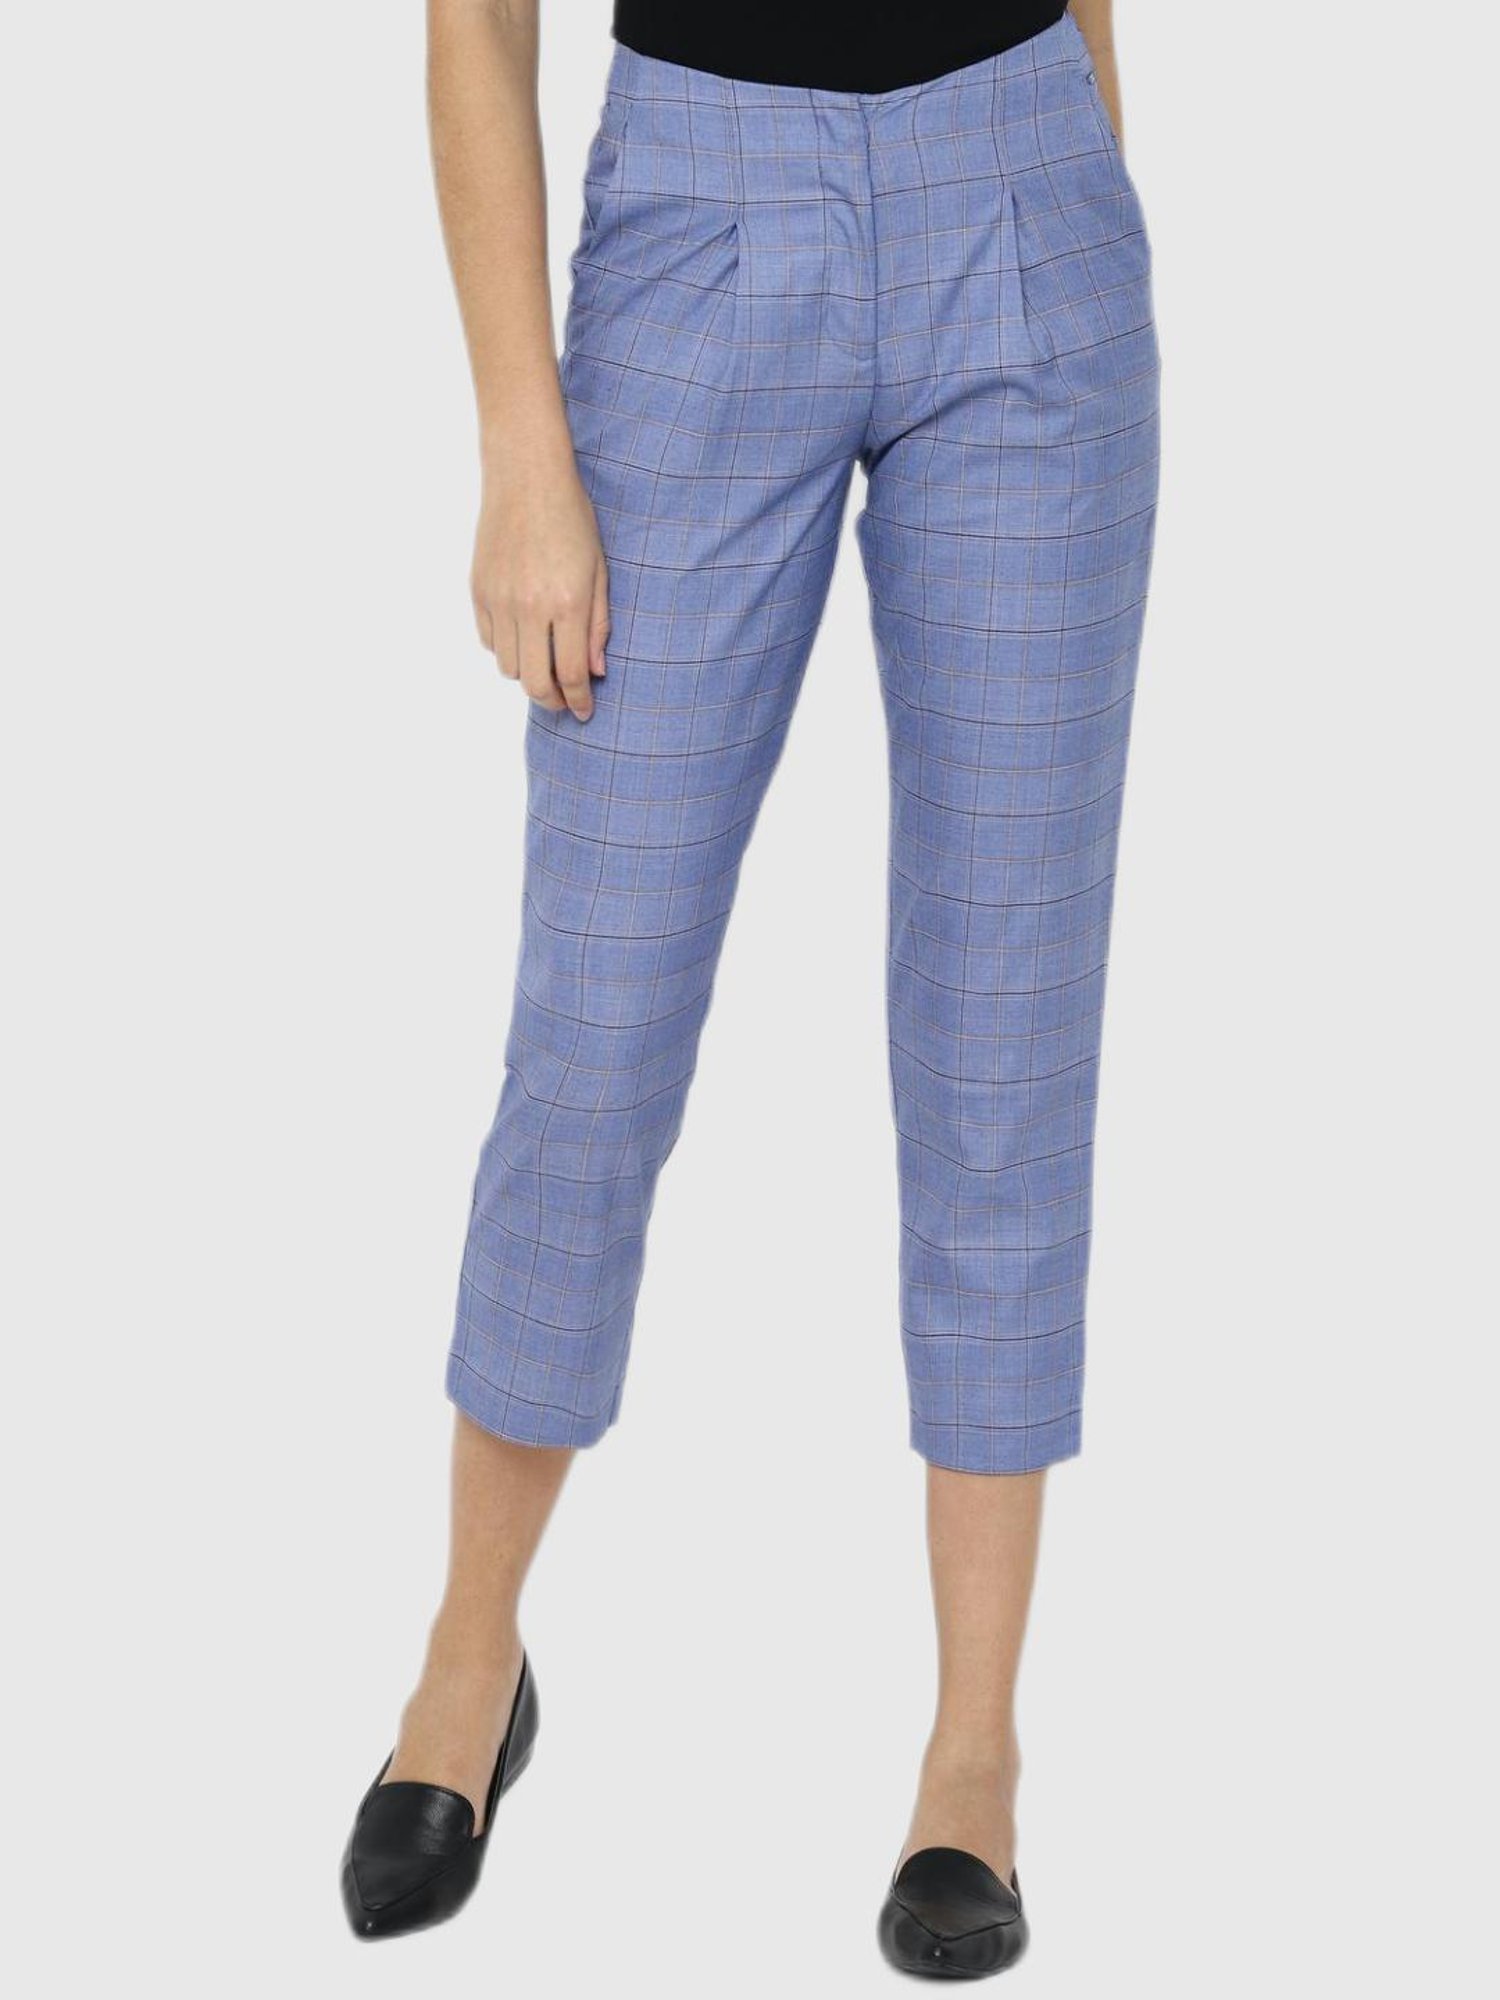 Buy Solly by Allen Solly Black Striped Trousers for Women Online @ Tata CLiQ